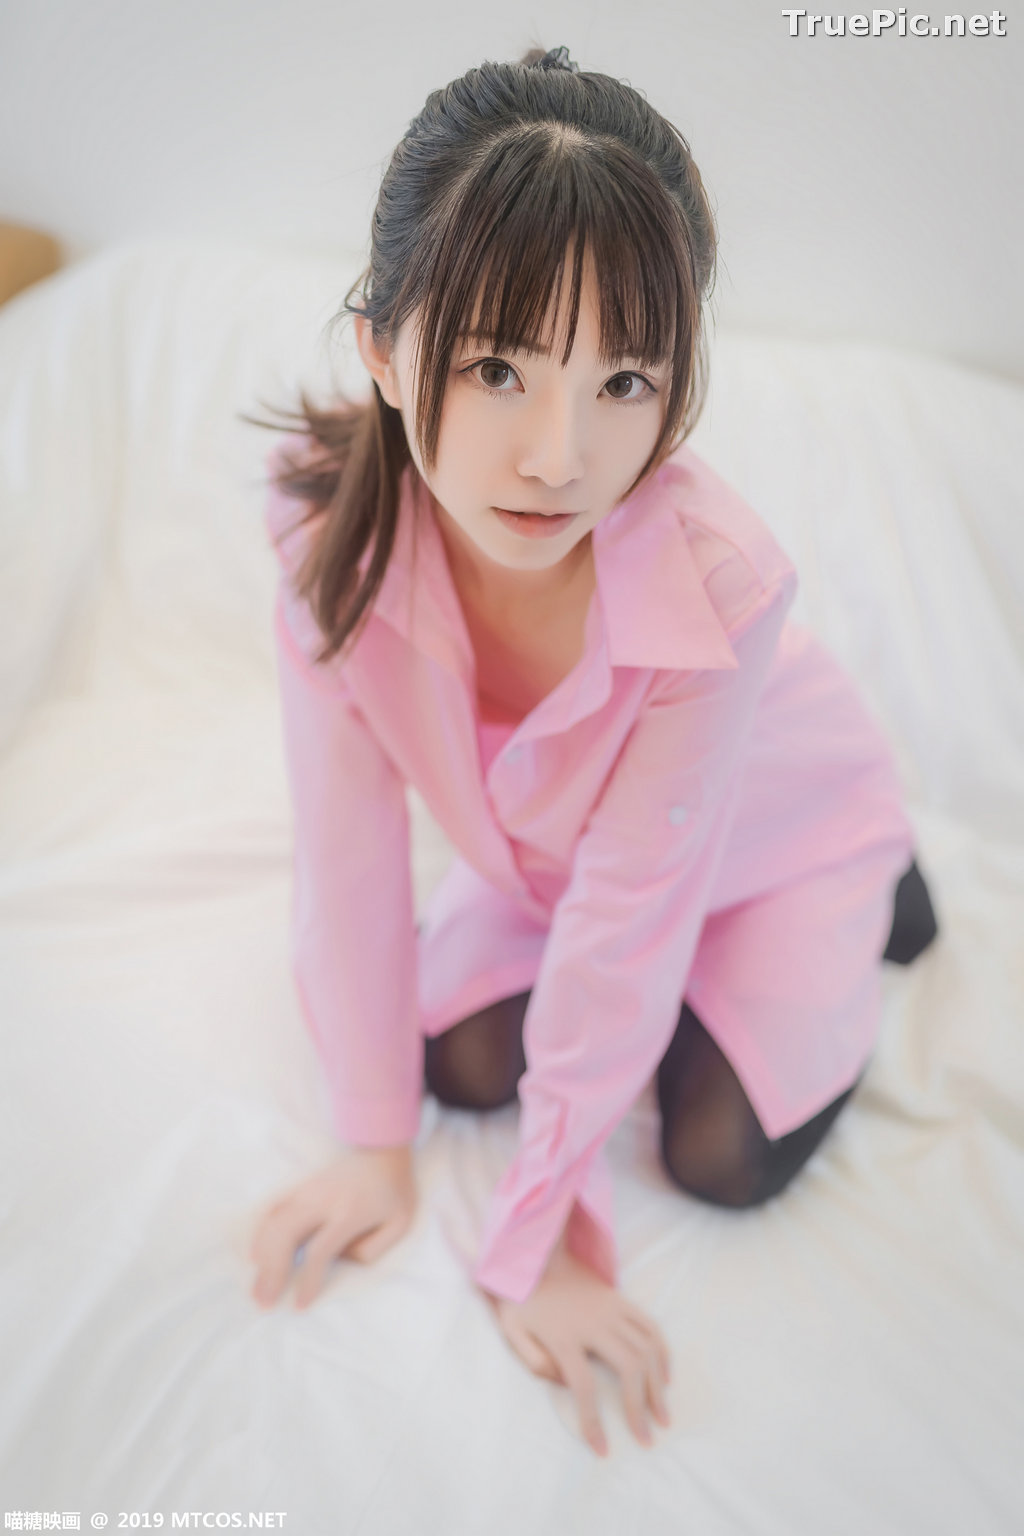 Image [MTCos] 喵糖映画 Vol.022 – Chinese Model – Pink Shirt and Black Stockings - TruePic.net - Picture-23